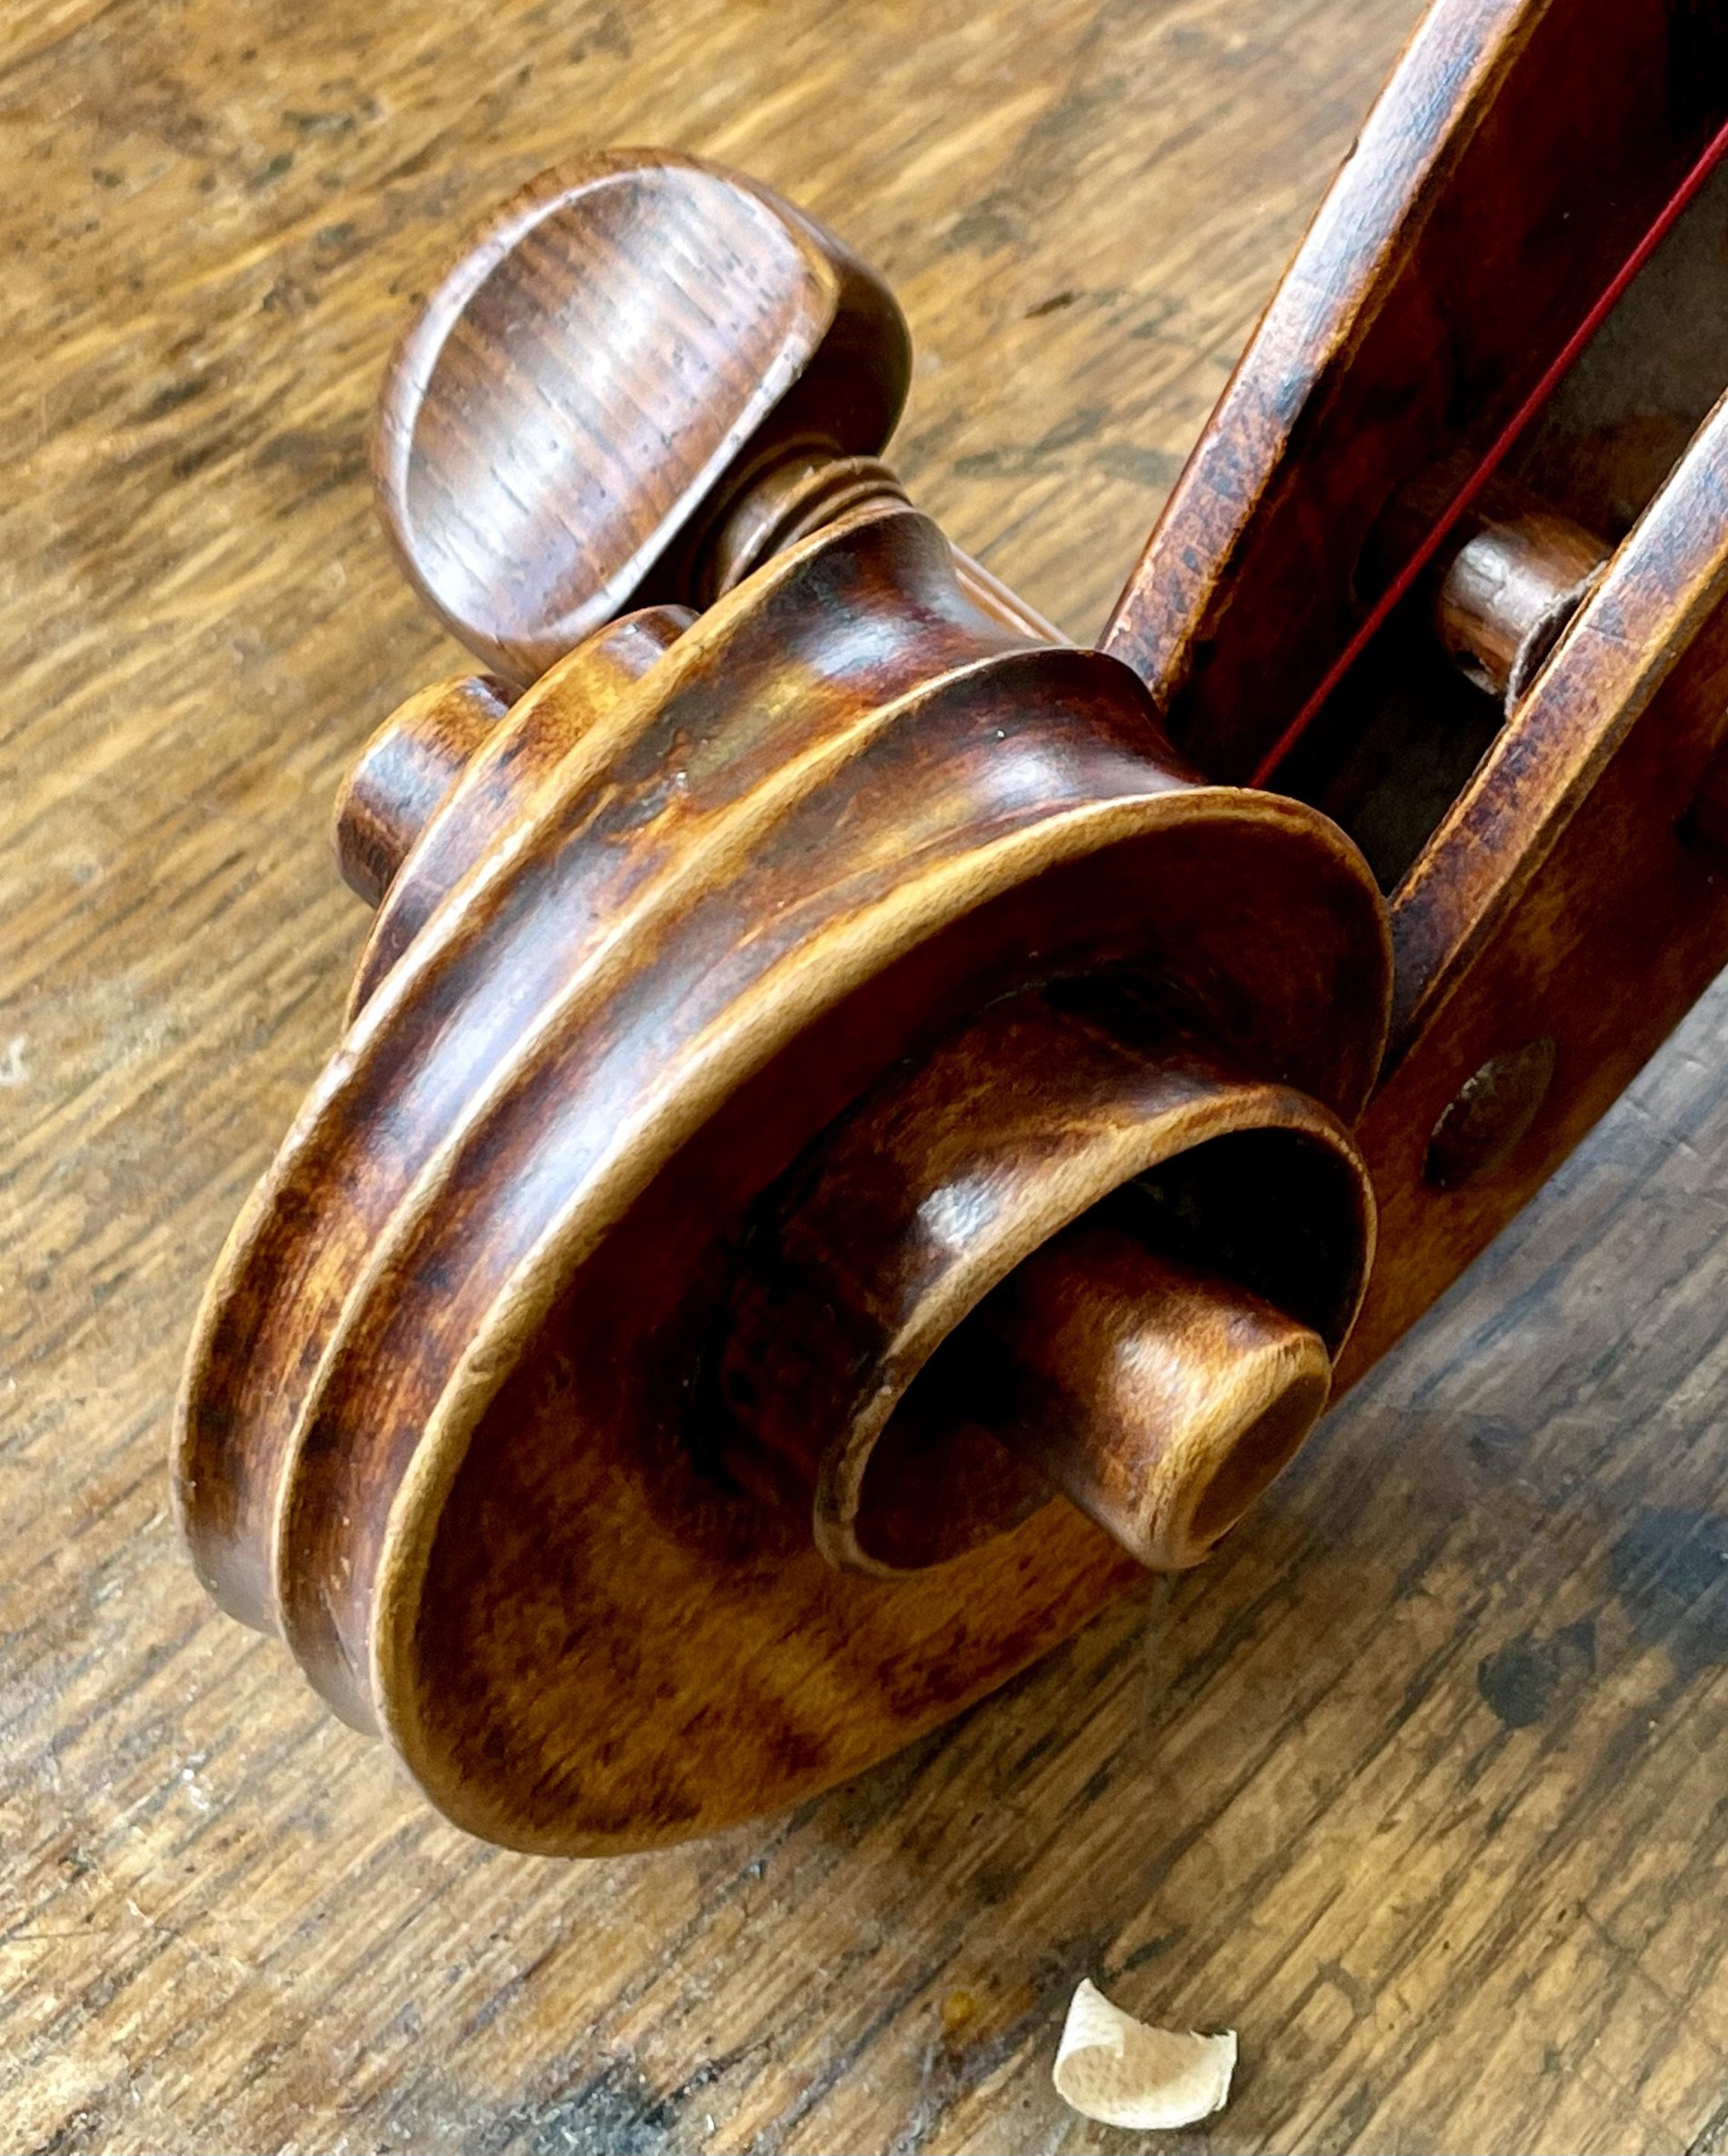 The confidently carved, stylish scroll of the cello